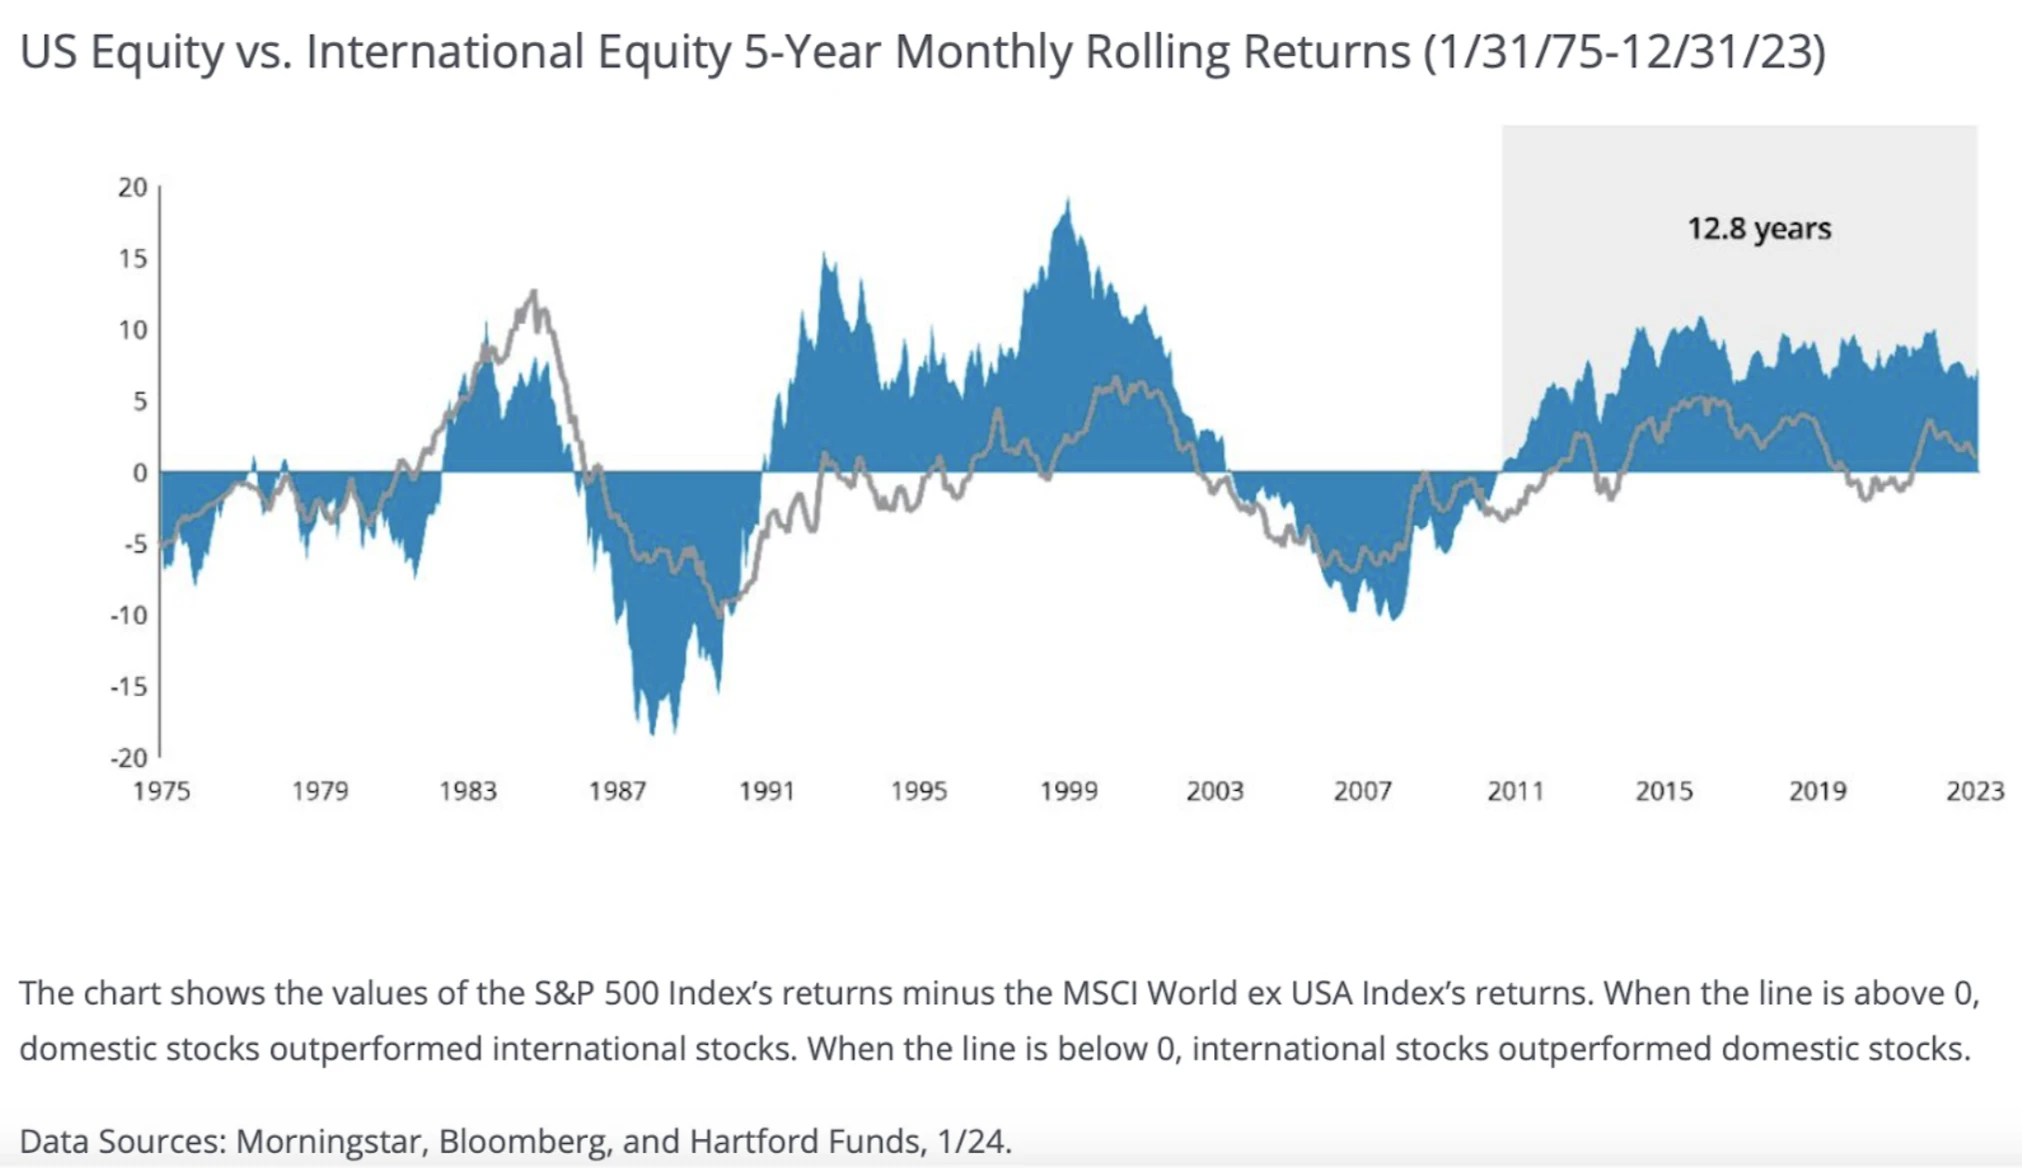 US Equity versus International equity 5-year monthly rolling returns - U.S. stocks have outperformed international stocks from 2011 to 2023